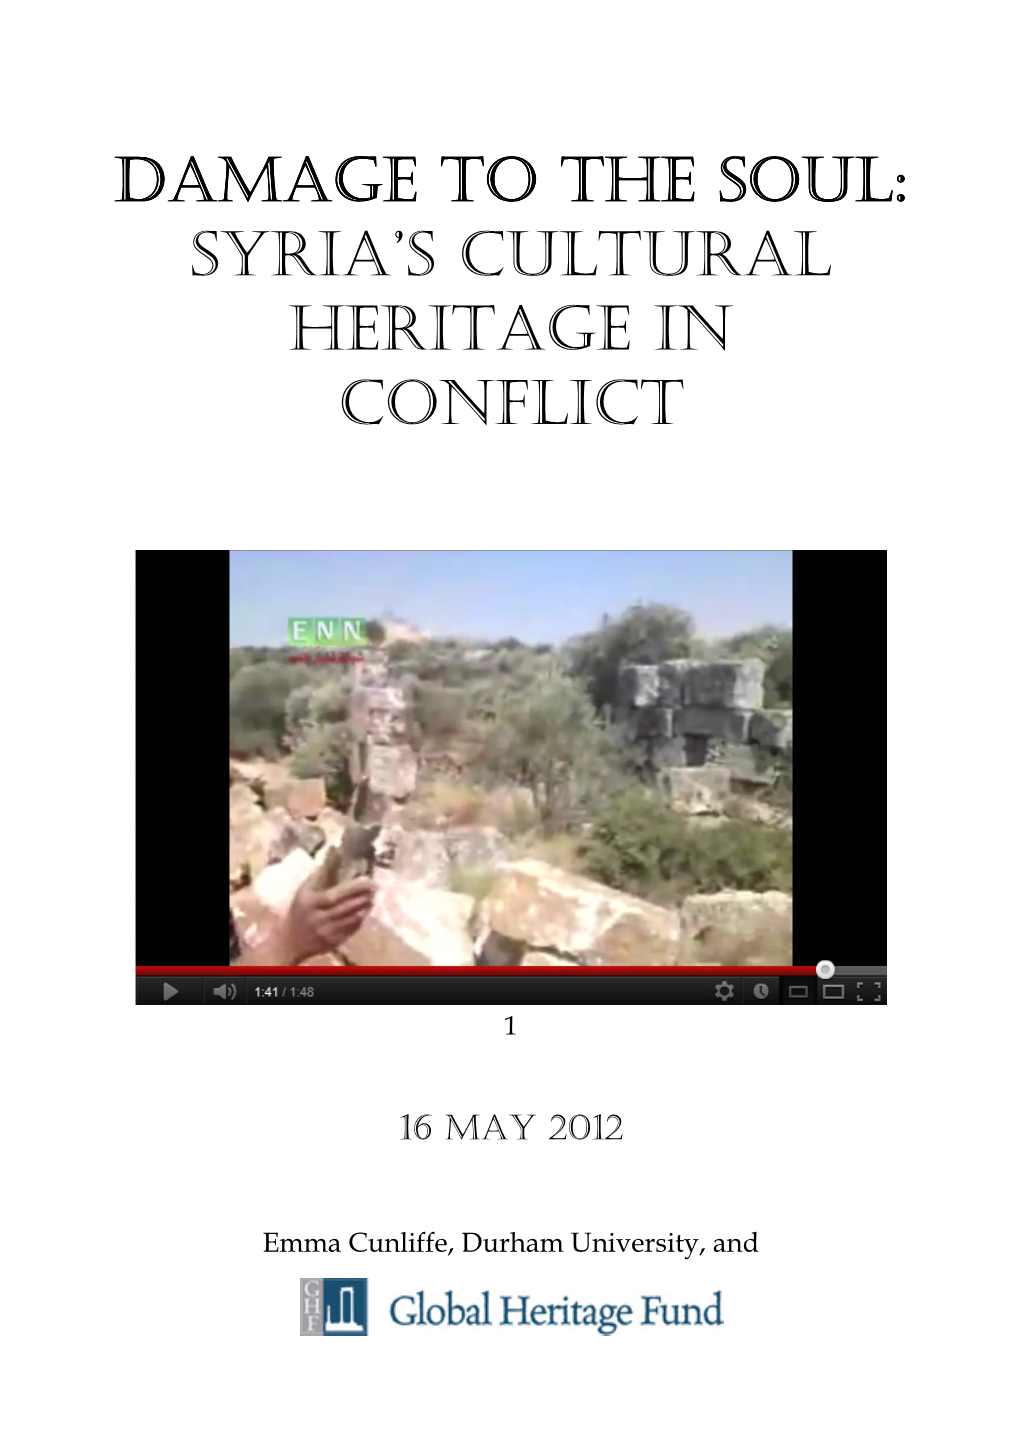 Syria's Cultural Heritage in Conflict